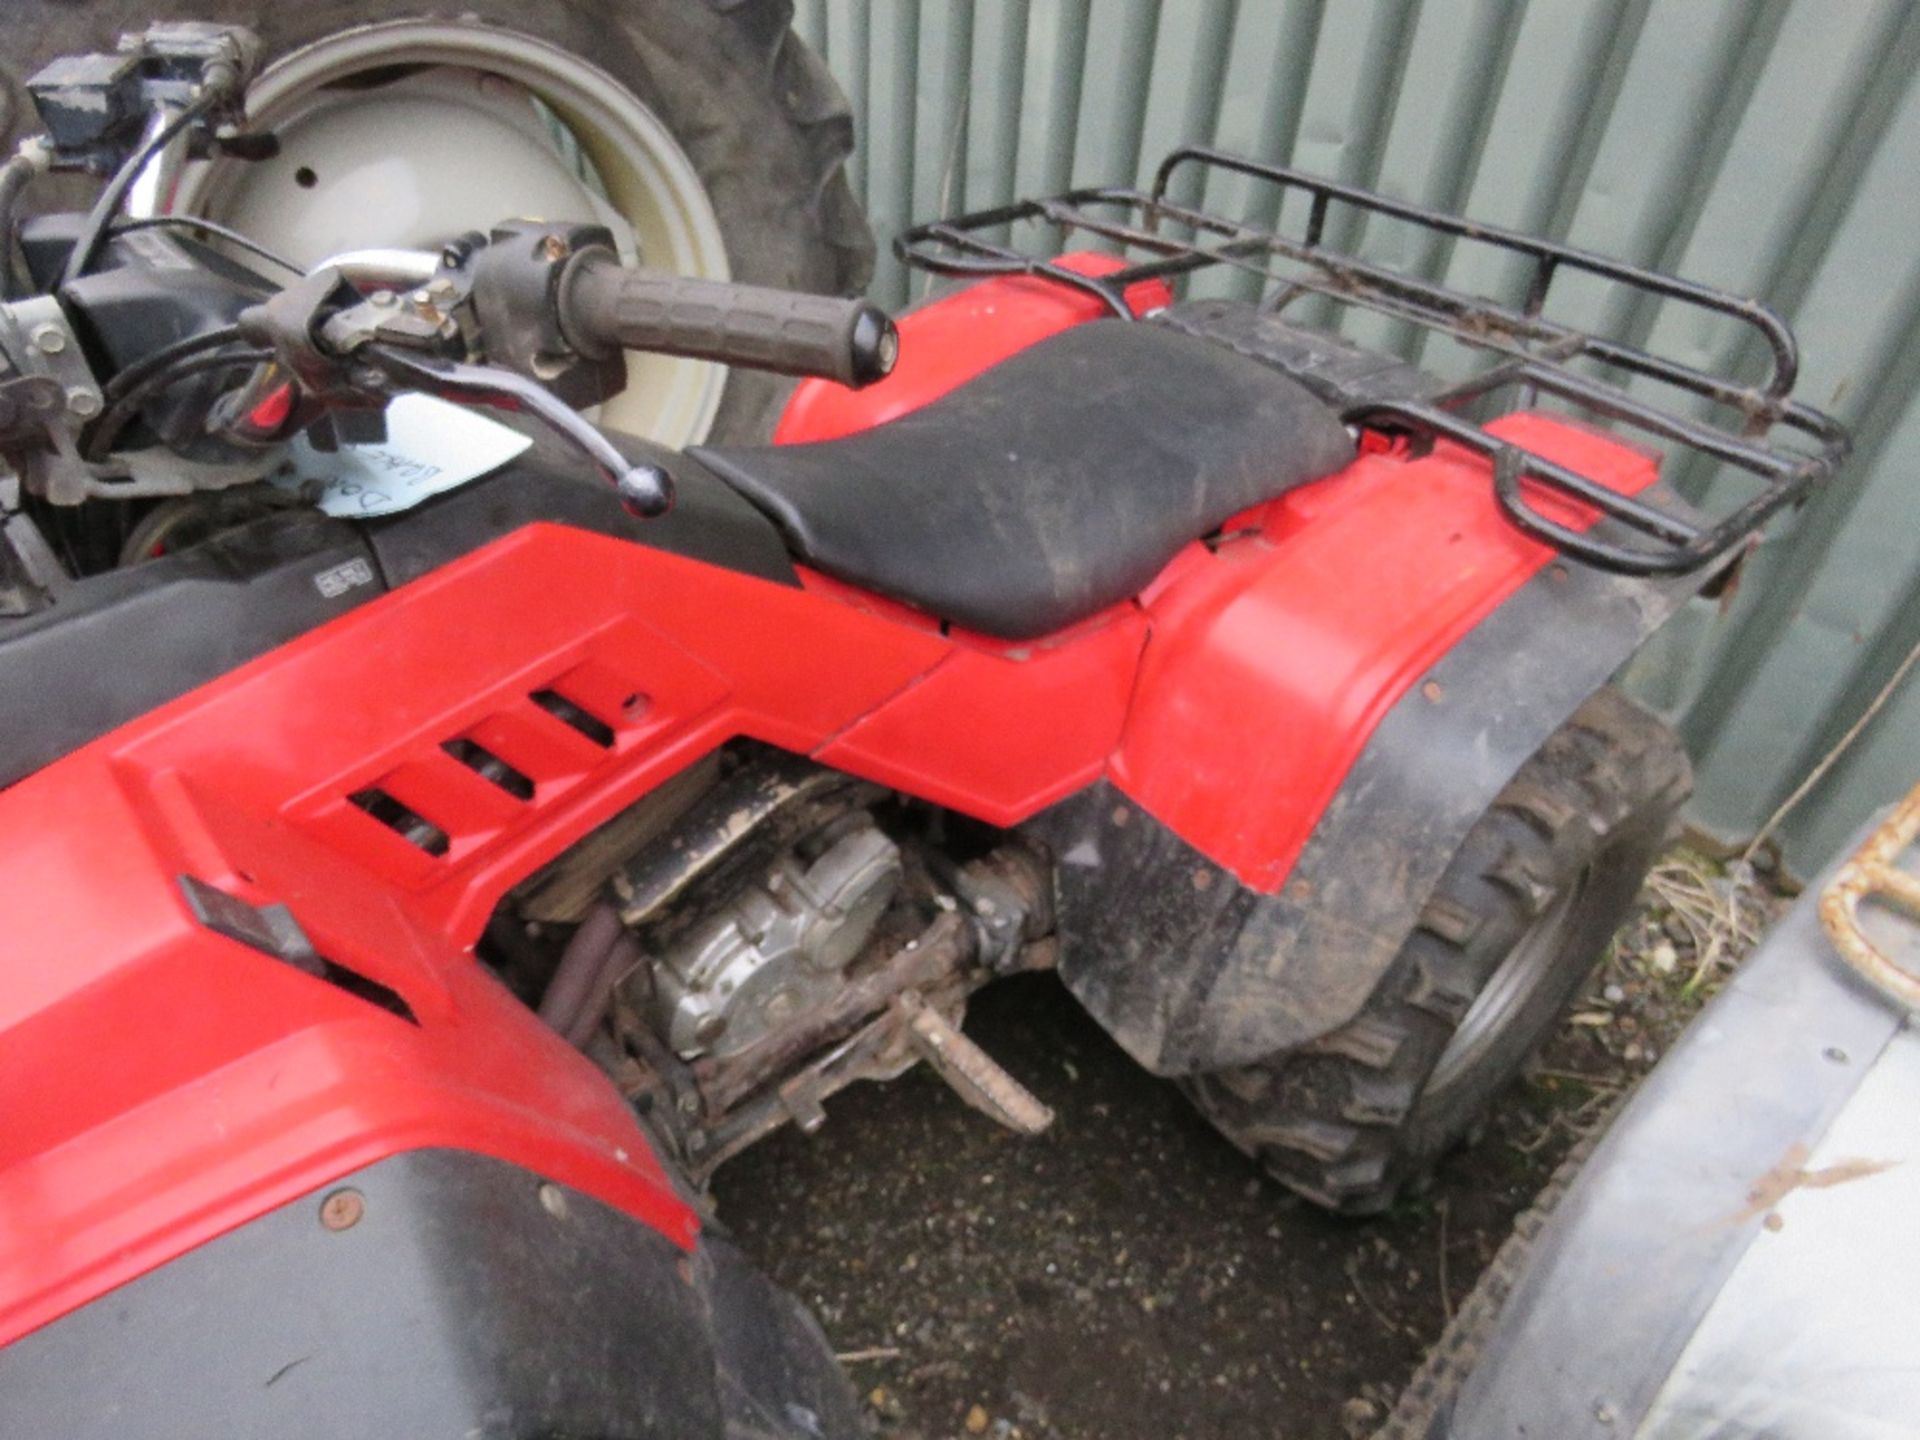 HONDA 2WD QUAD BIKE, RECENT TYRE REPLACEMENT. WHEN TESTED WAS SEEN TO START, DRIVE AND STEER, BRAKES - Image 3 of 8